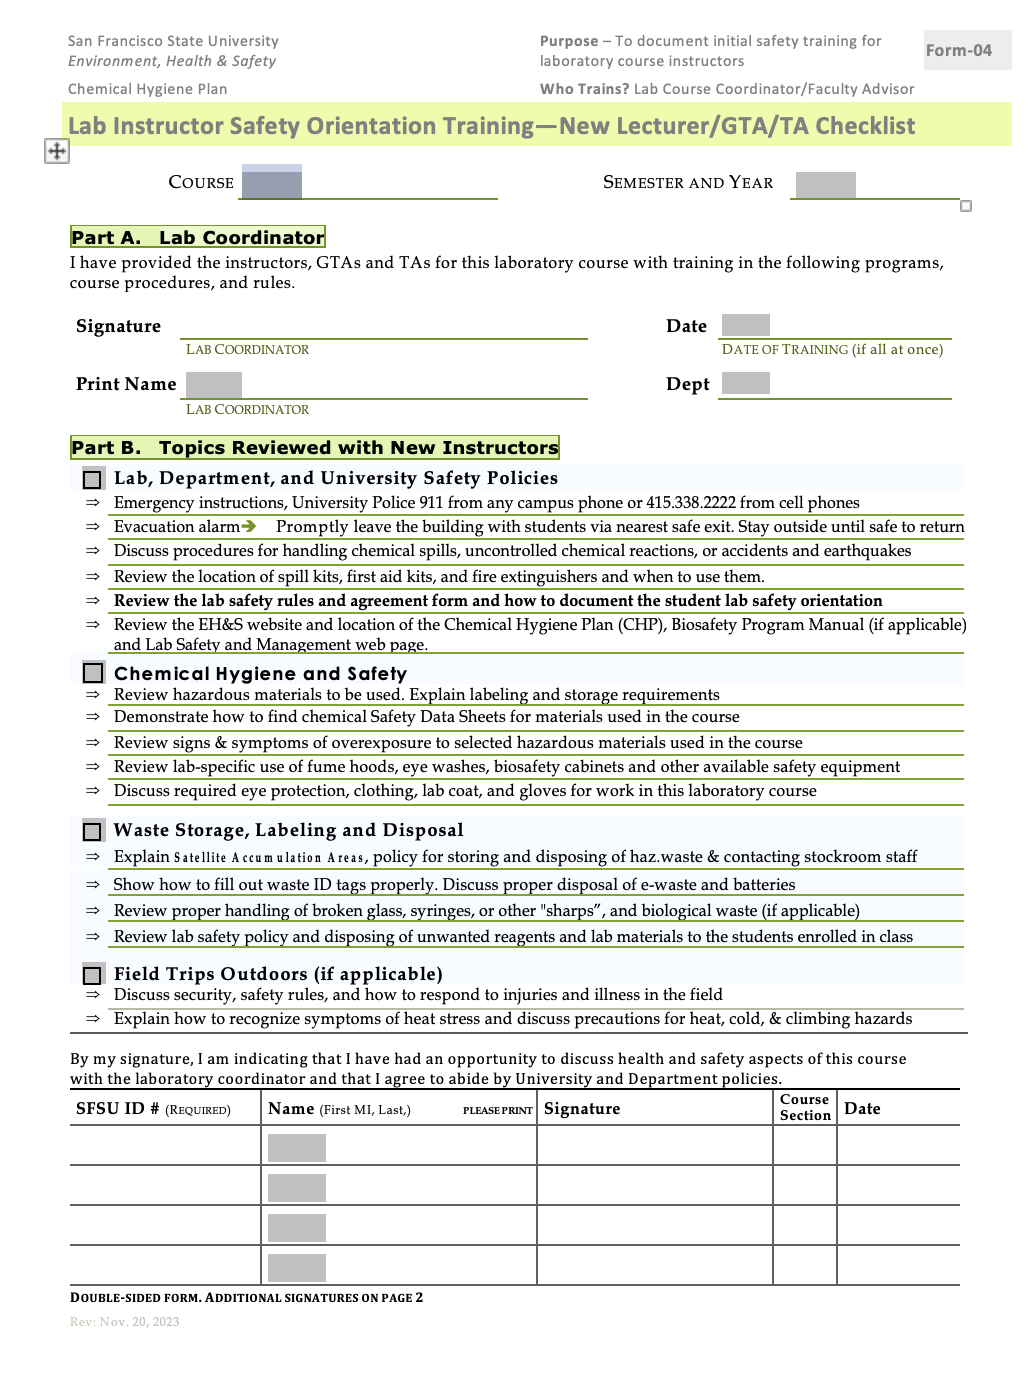 New laboratory course instructor safety orientation form